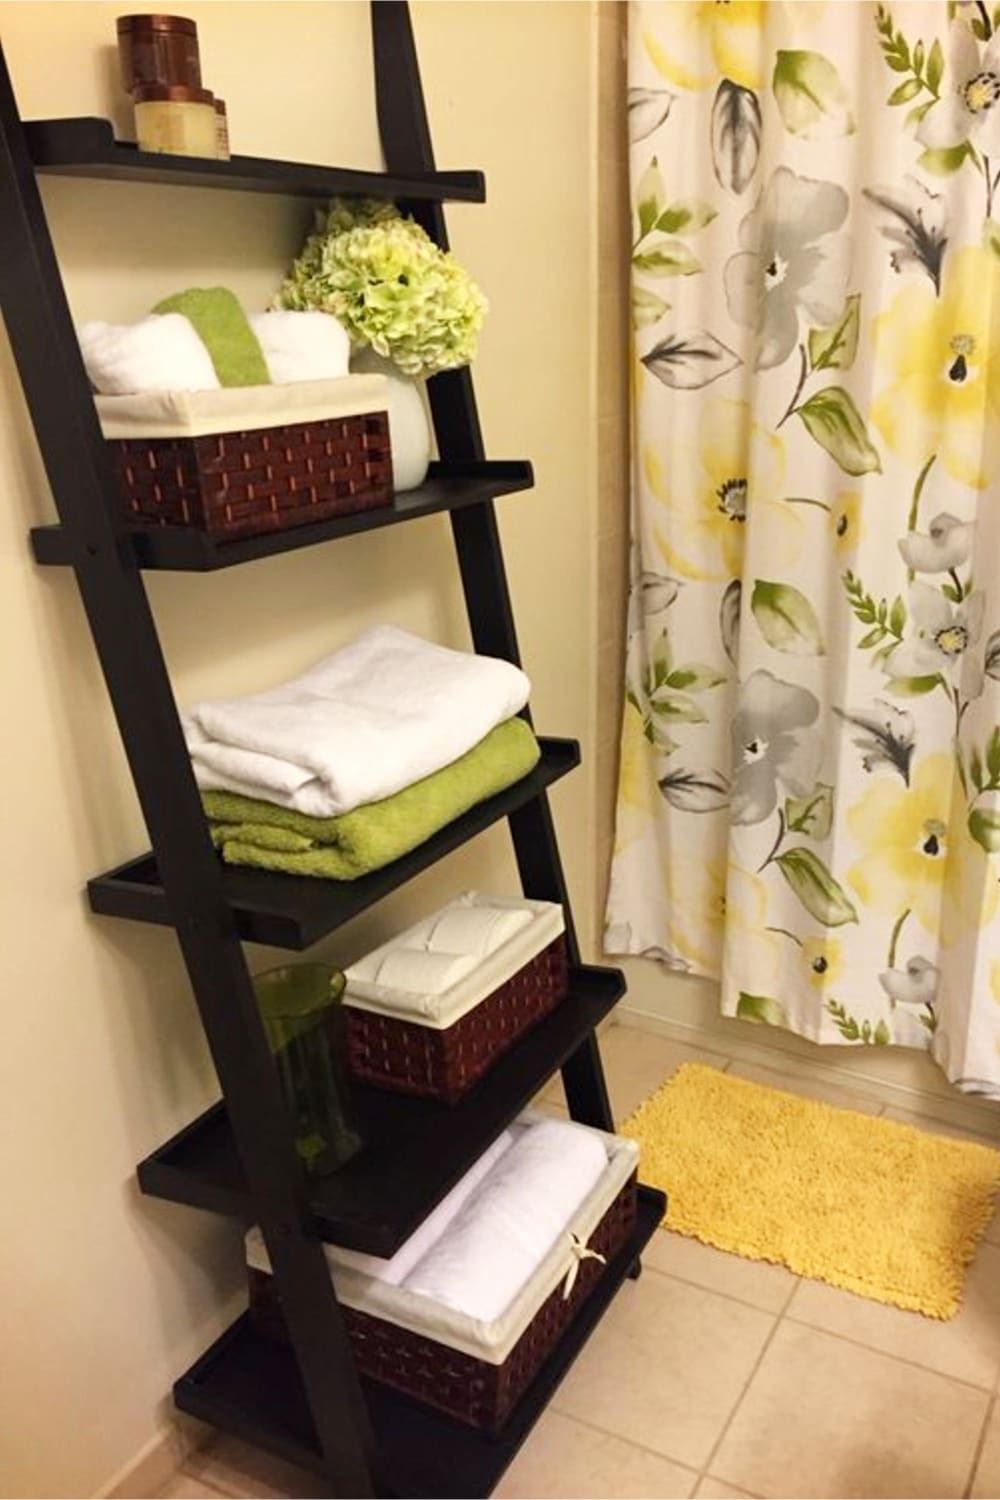 Linen storage idas for small spaces - how to store towels with no linen closet